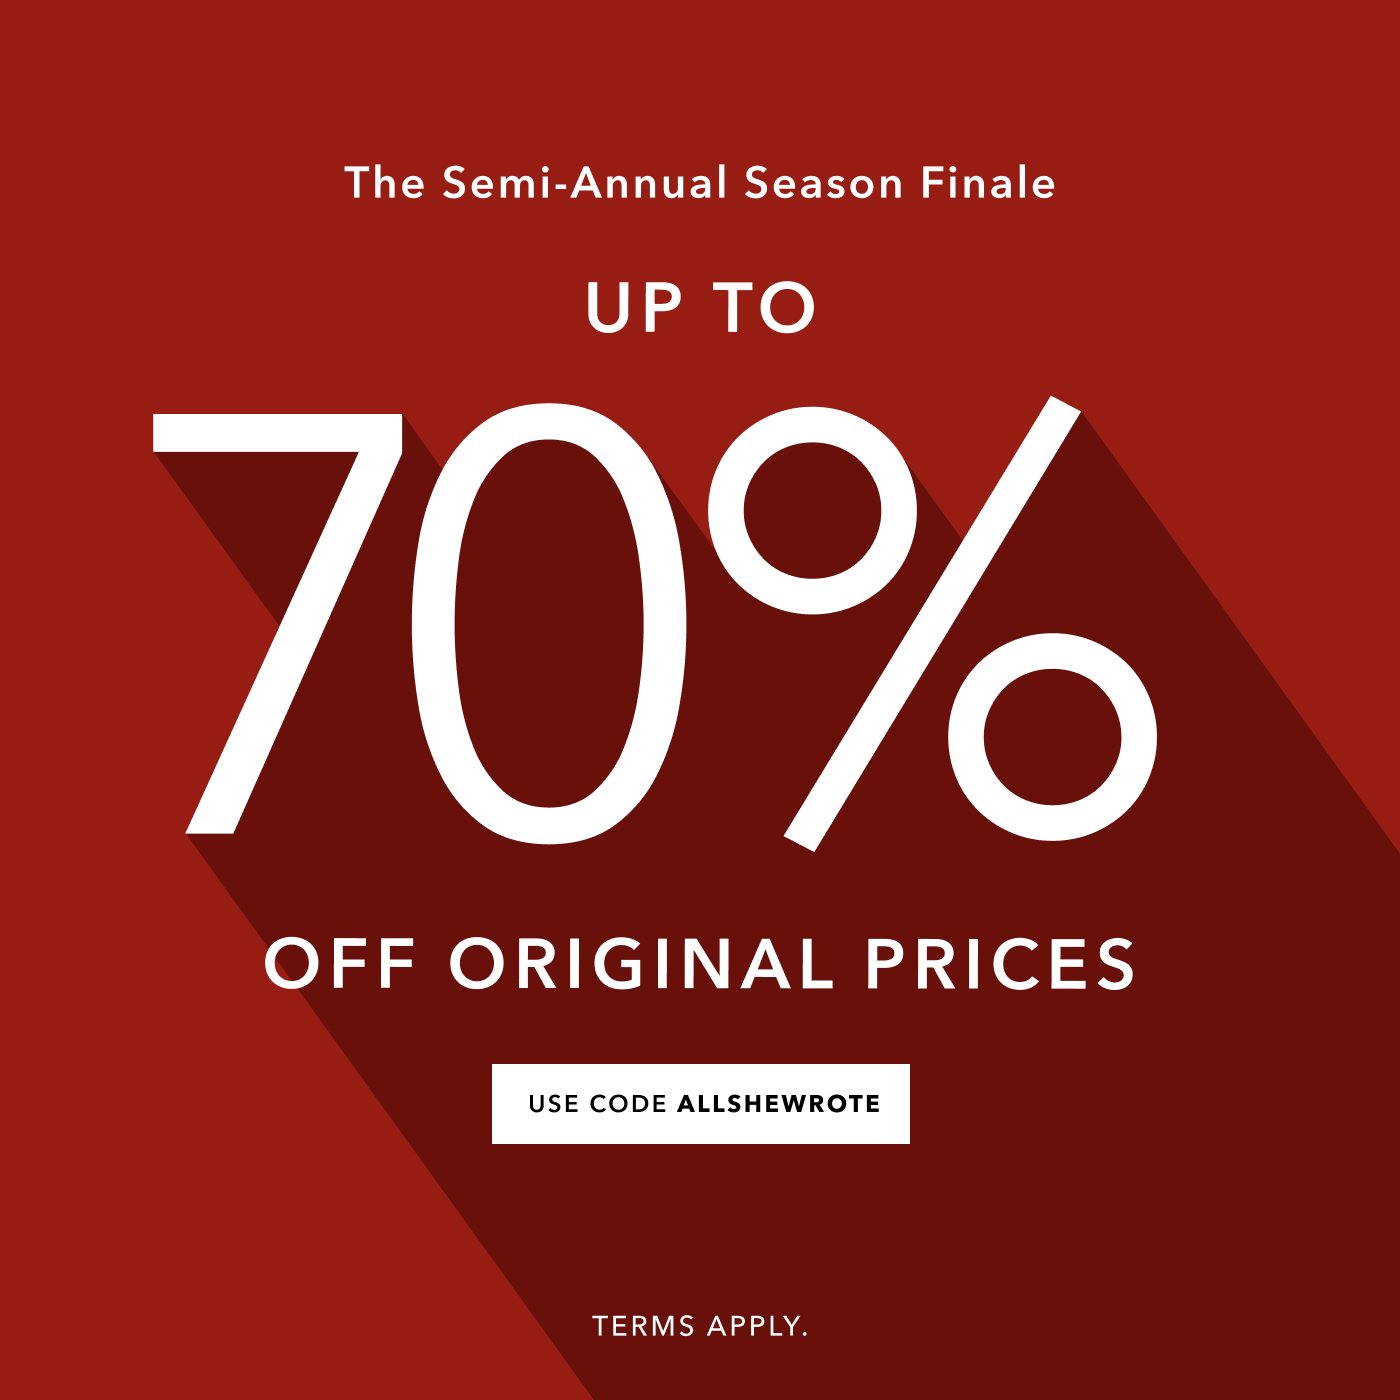 The Semi-Annual Season Finale Up to 70% off Shop Now original prices *terms apply 